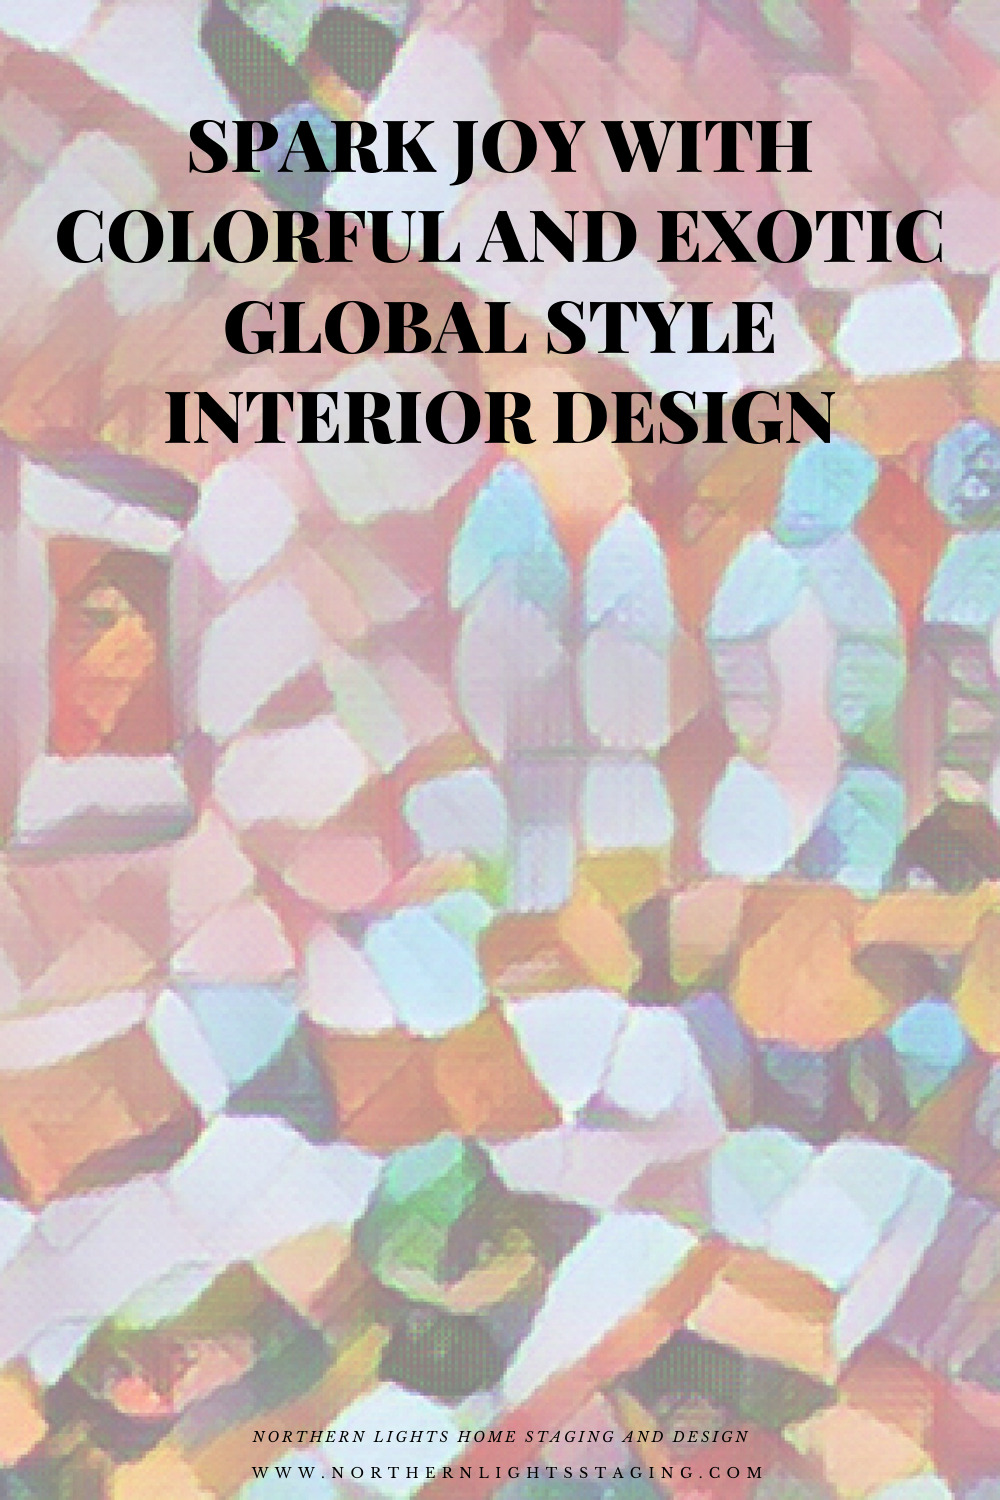 Spark Joy with Colorful and Exotic Global Style Interior Design